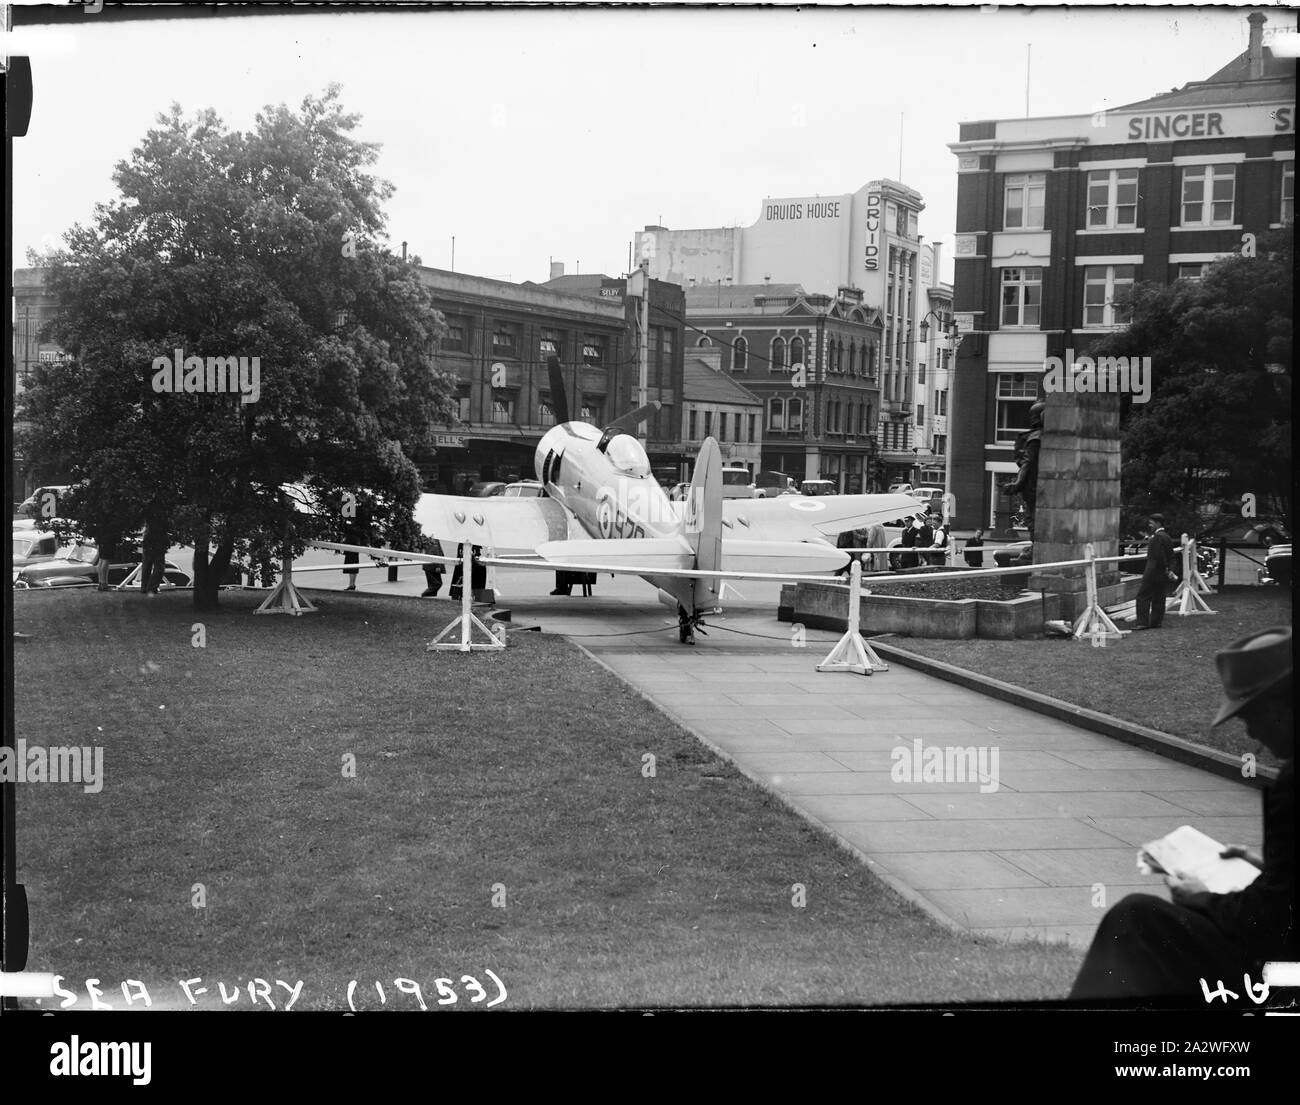 Glass Negative - Sea Fury Military Bomber Aircraft, Museum of Applied Science of Victoria (Science Museum), Melbourne, 1953, Photograph showing rear view of the Royal Australian Navy's Sea Fury Aircraft outside the Museum of Applied Science of Victoria, corner of Swanston and Bourke Street, 1953. The Sea Fury was loaned by the Royal Australian Navy for the Jubilee of Flight Exhibition. The exhibition commemorated fifty years of aviation, and was open from Dec 10 1953 to Feb 1954 Stock Photo